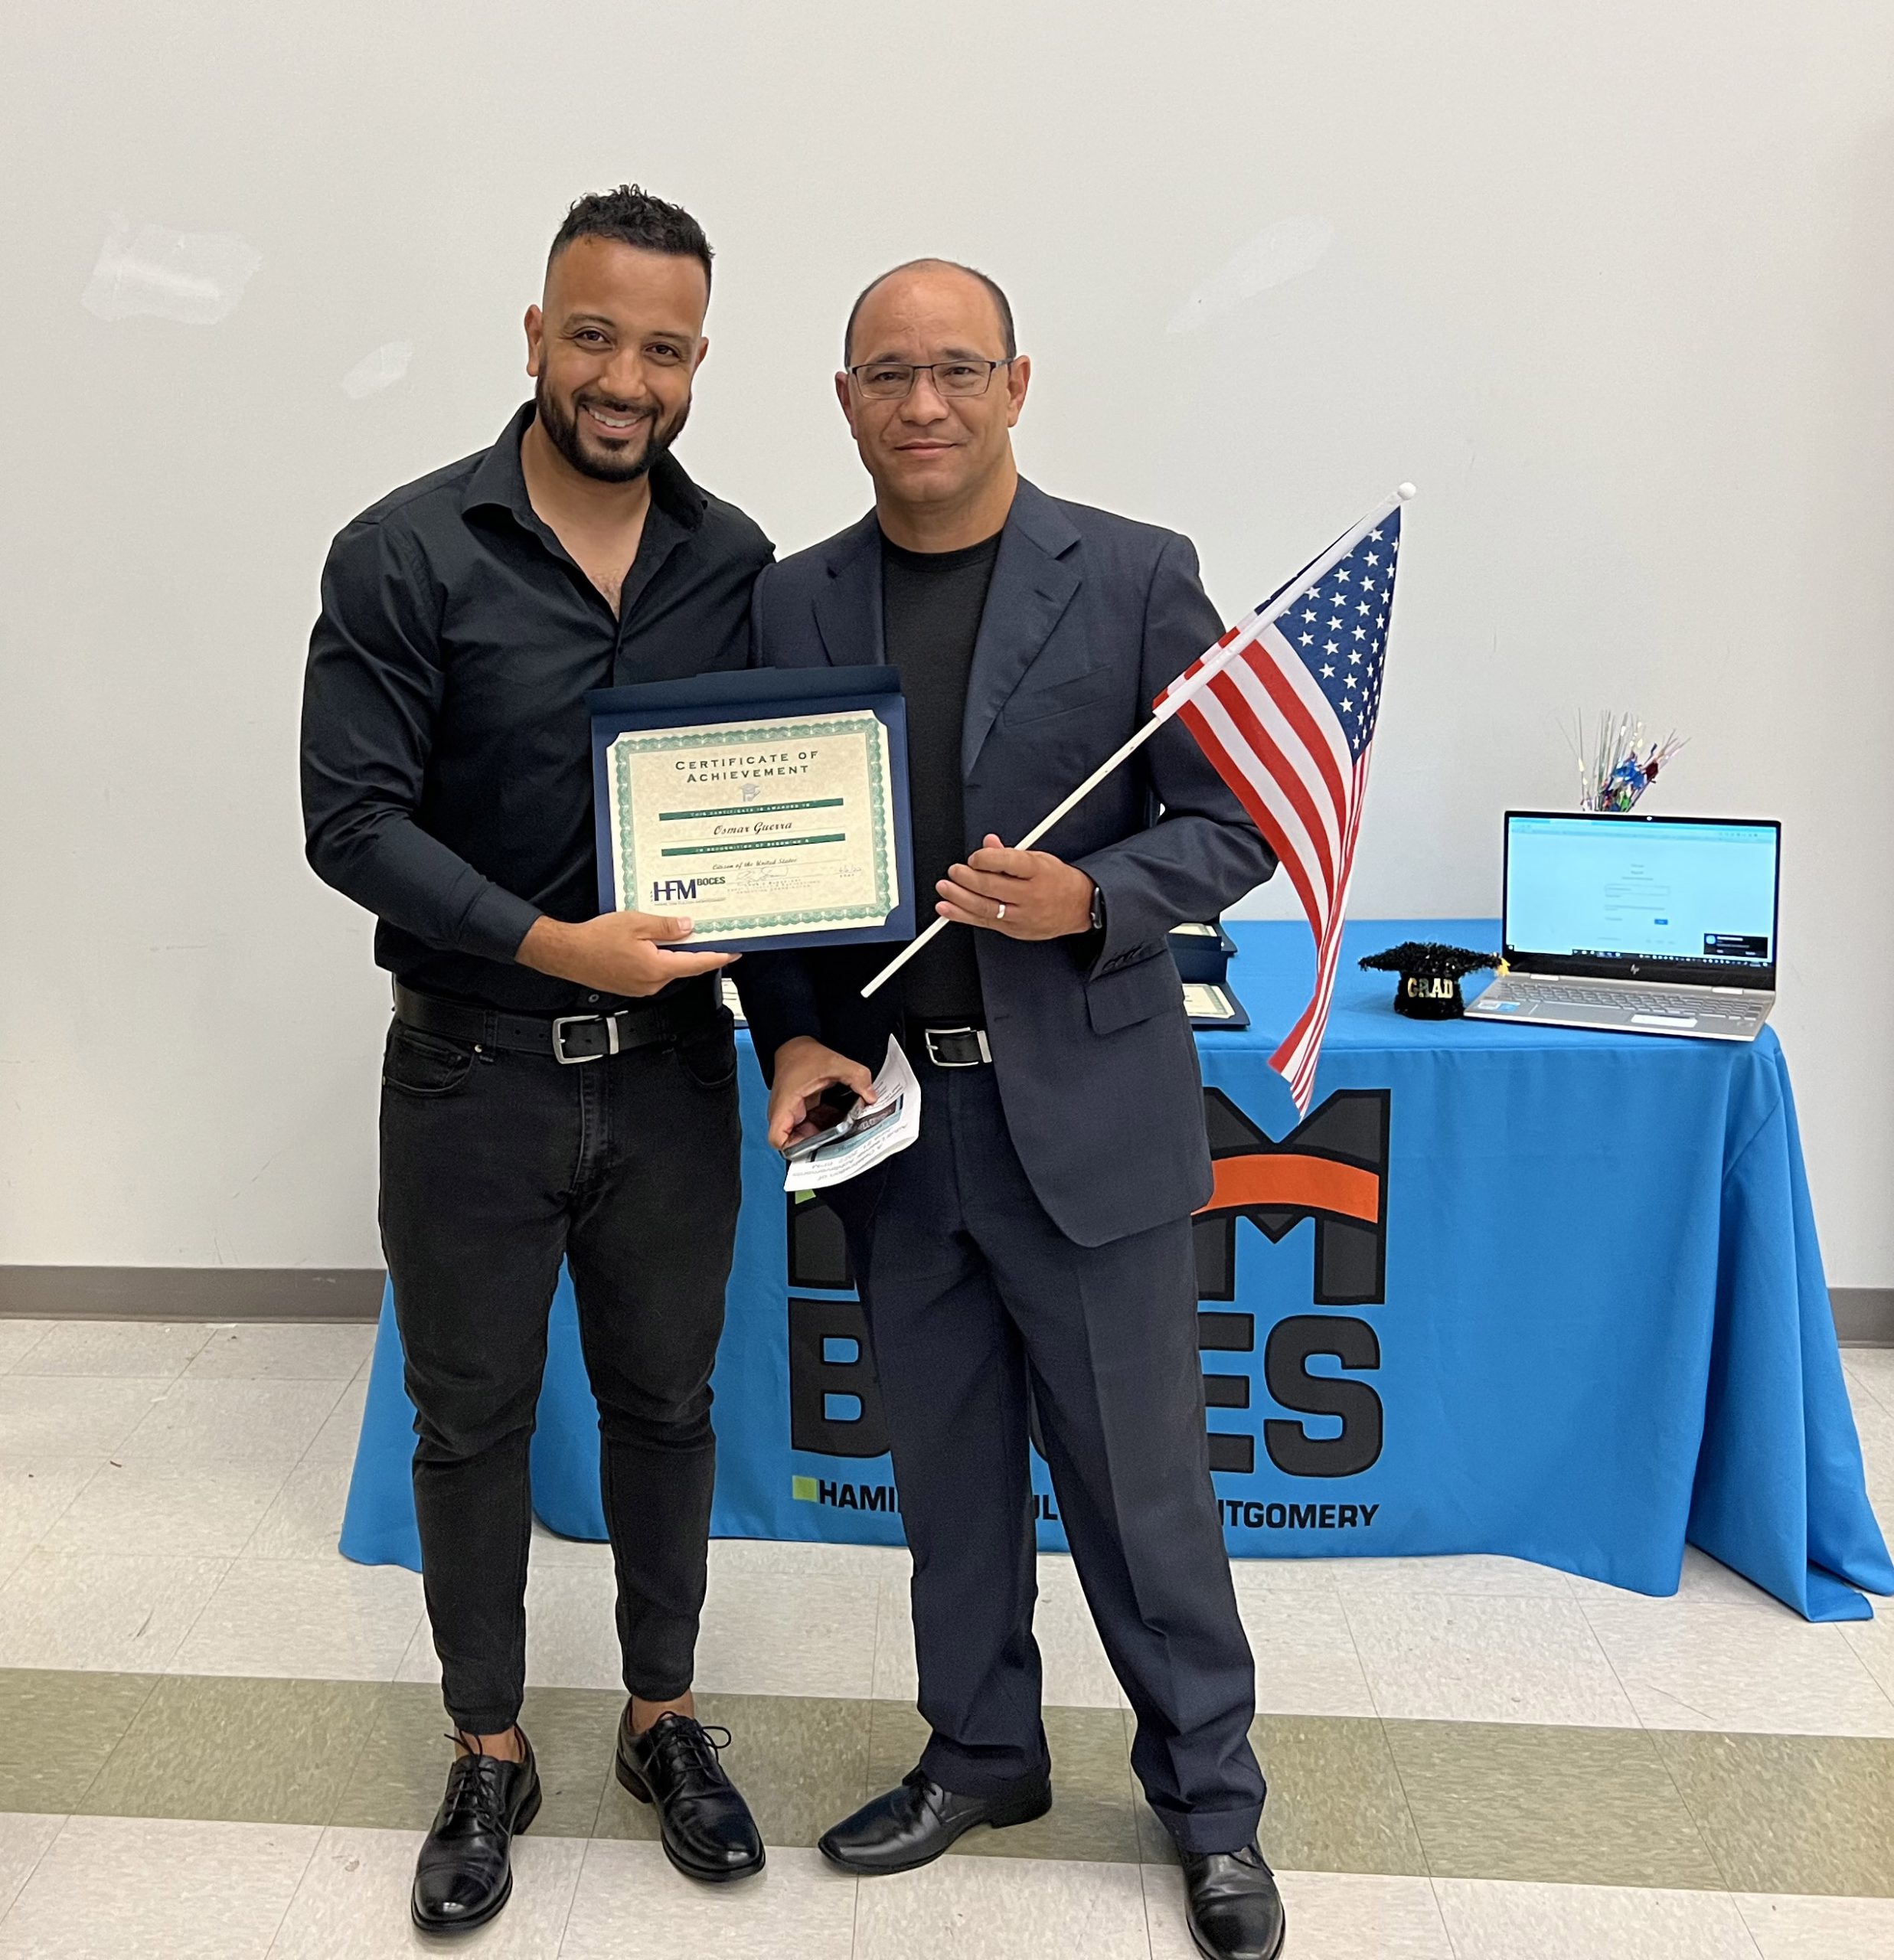 Adult Educator Geovanny Santamaria congratulates an adult student from Cuba who recently attained U.S. citizenship.